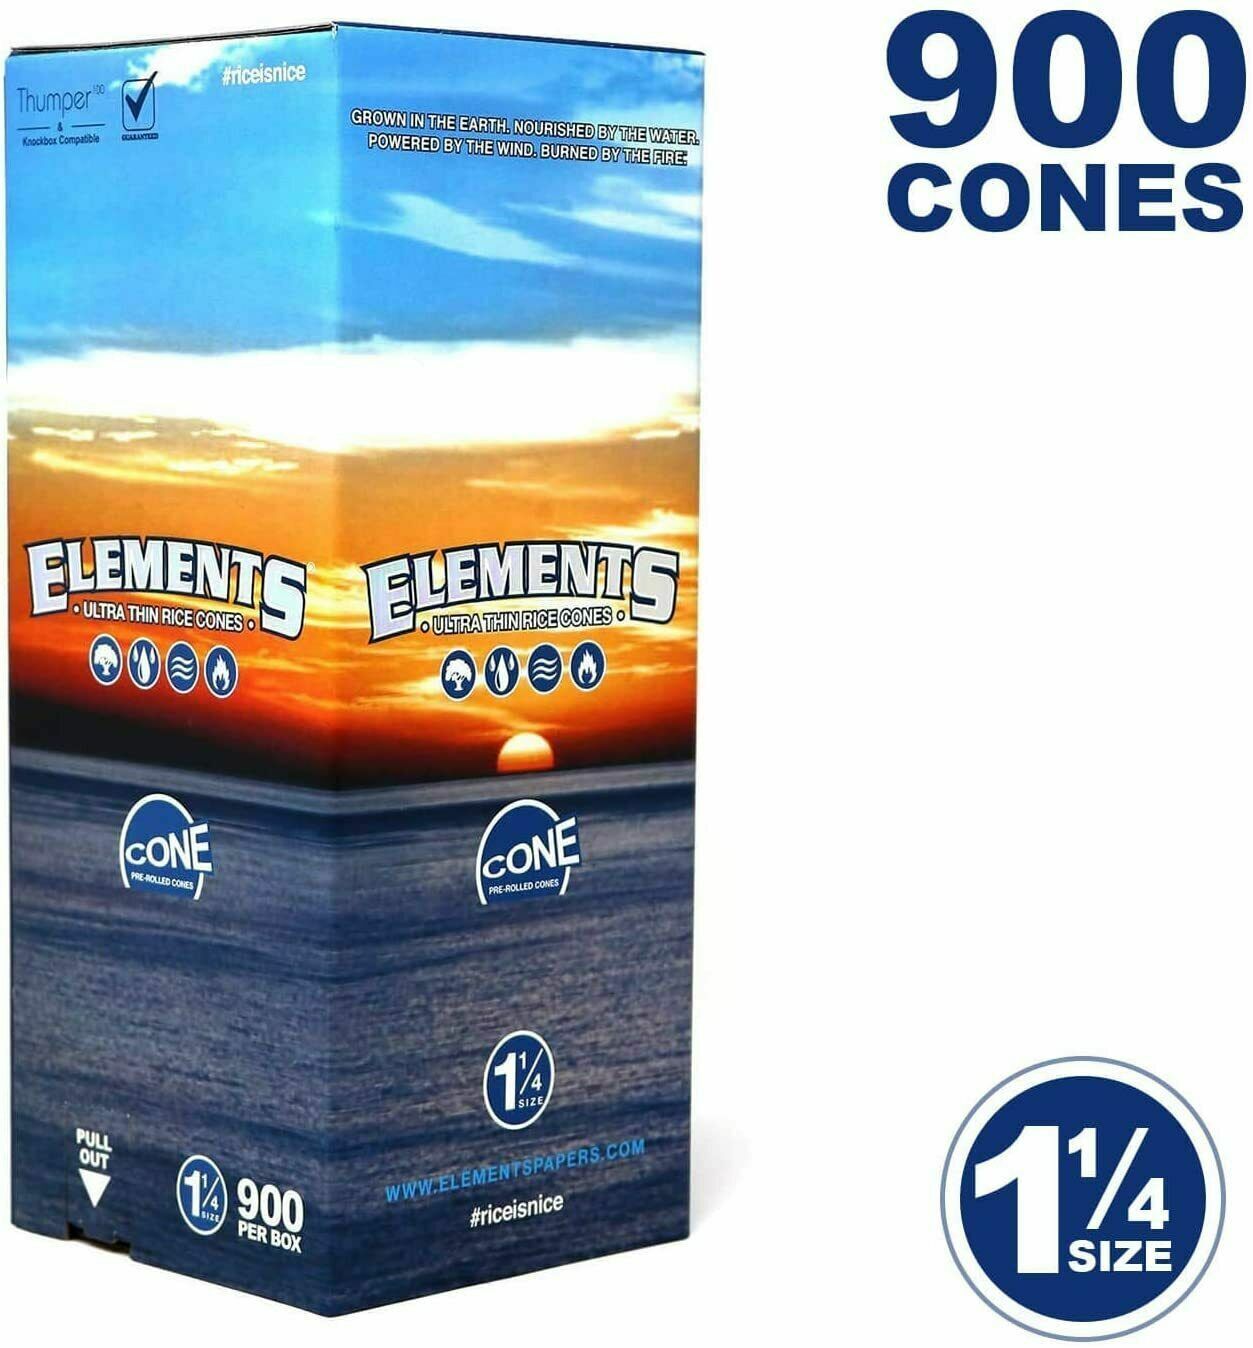 Elements 900 1 1/4 Rice Cones - Natural Unbleached Unrefined Rolling Papers